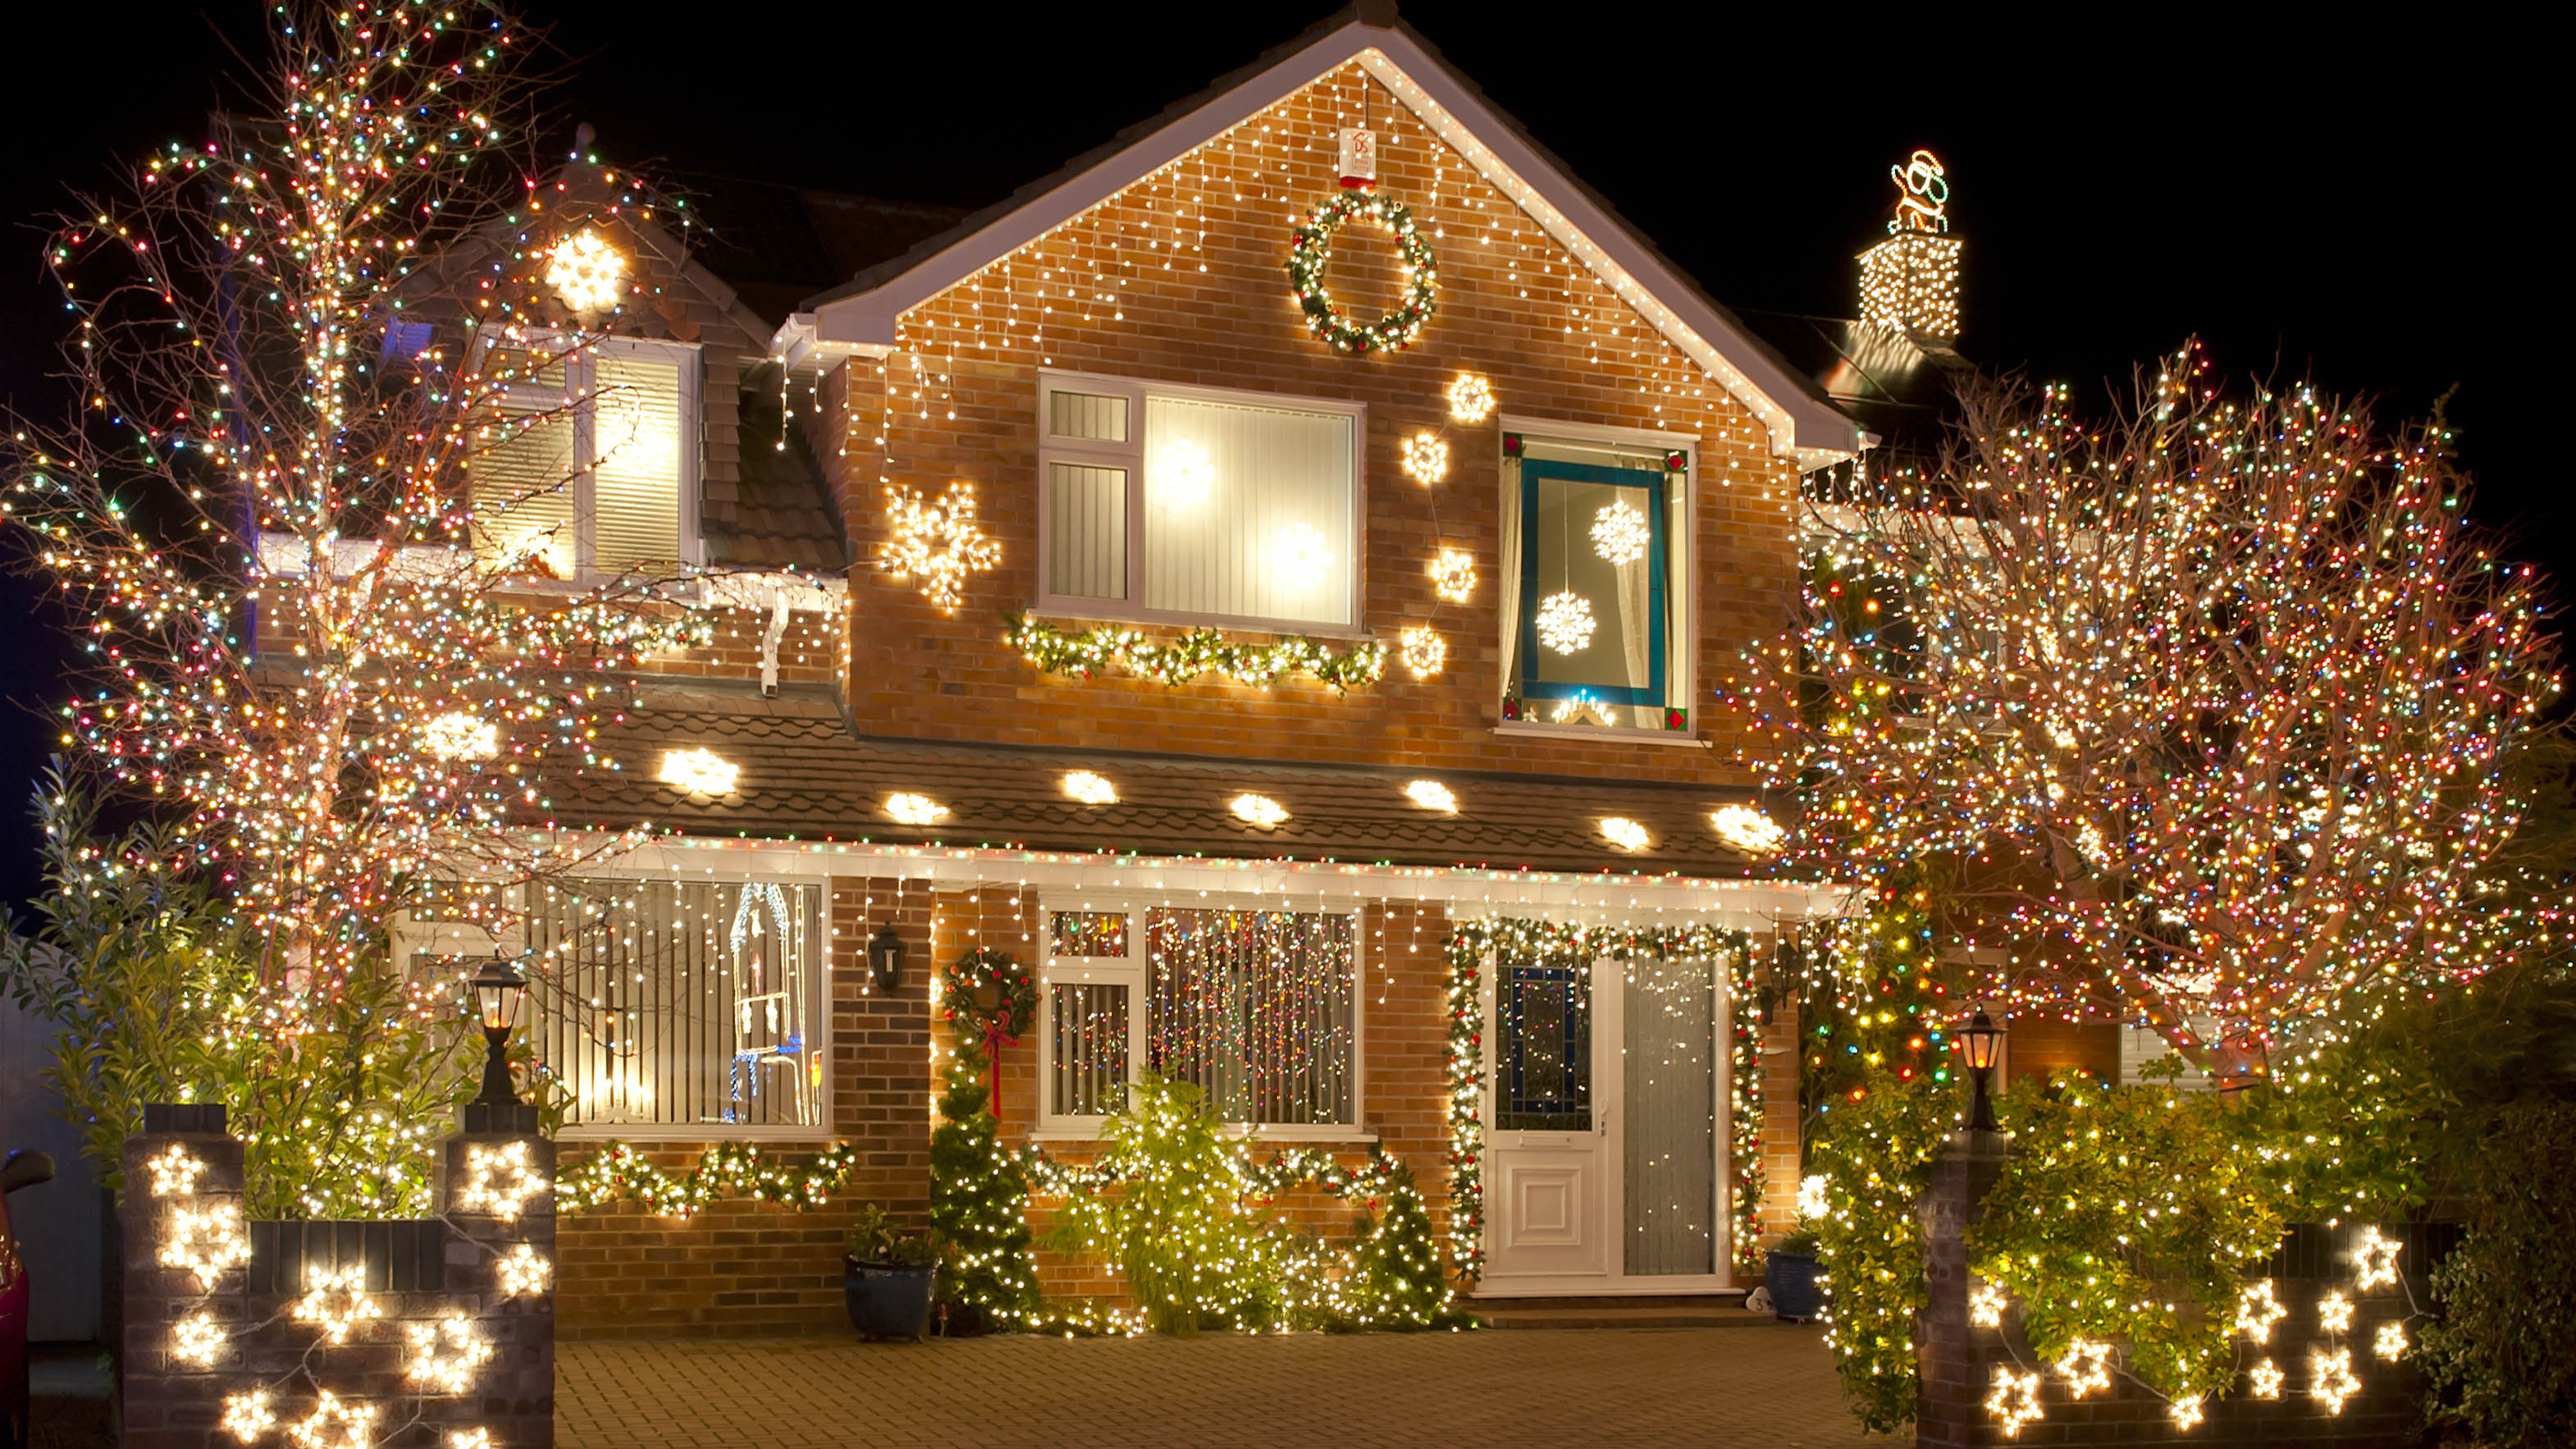 When should you take down your Christmas decorations? | Tom's Guide